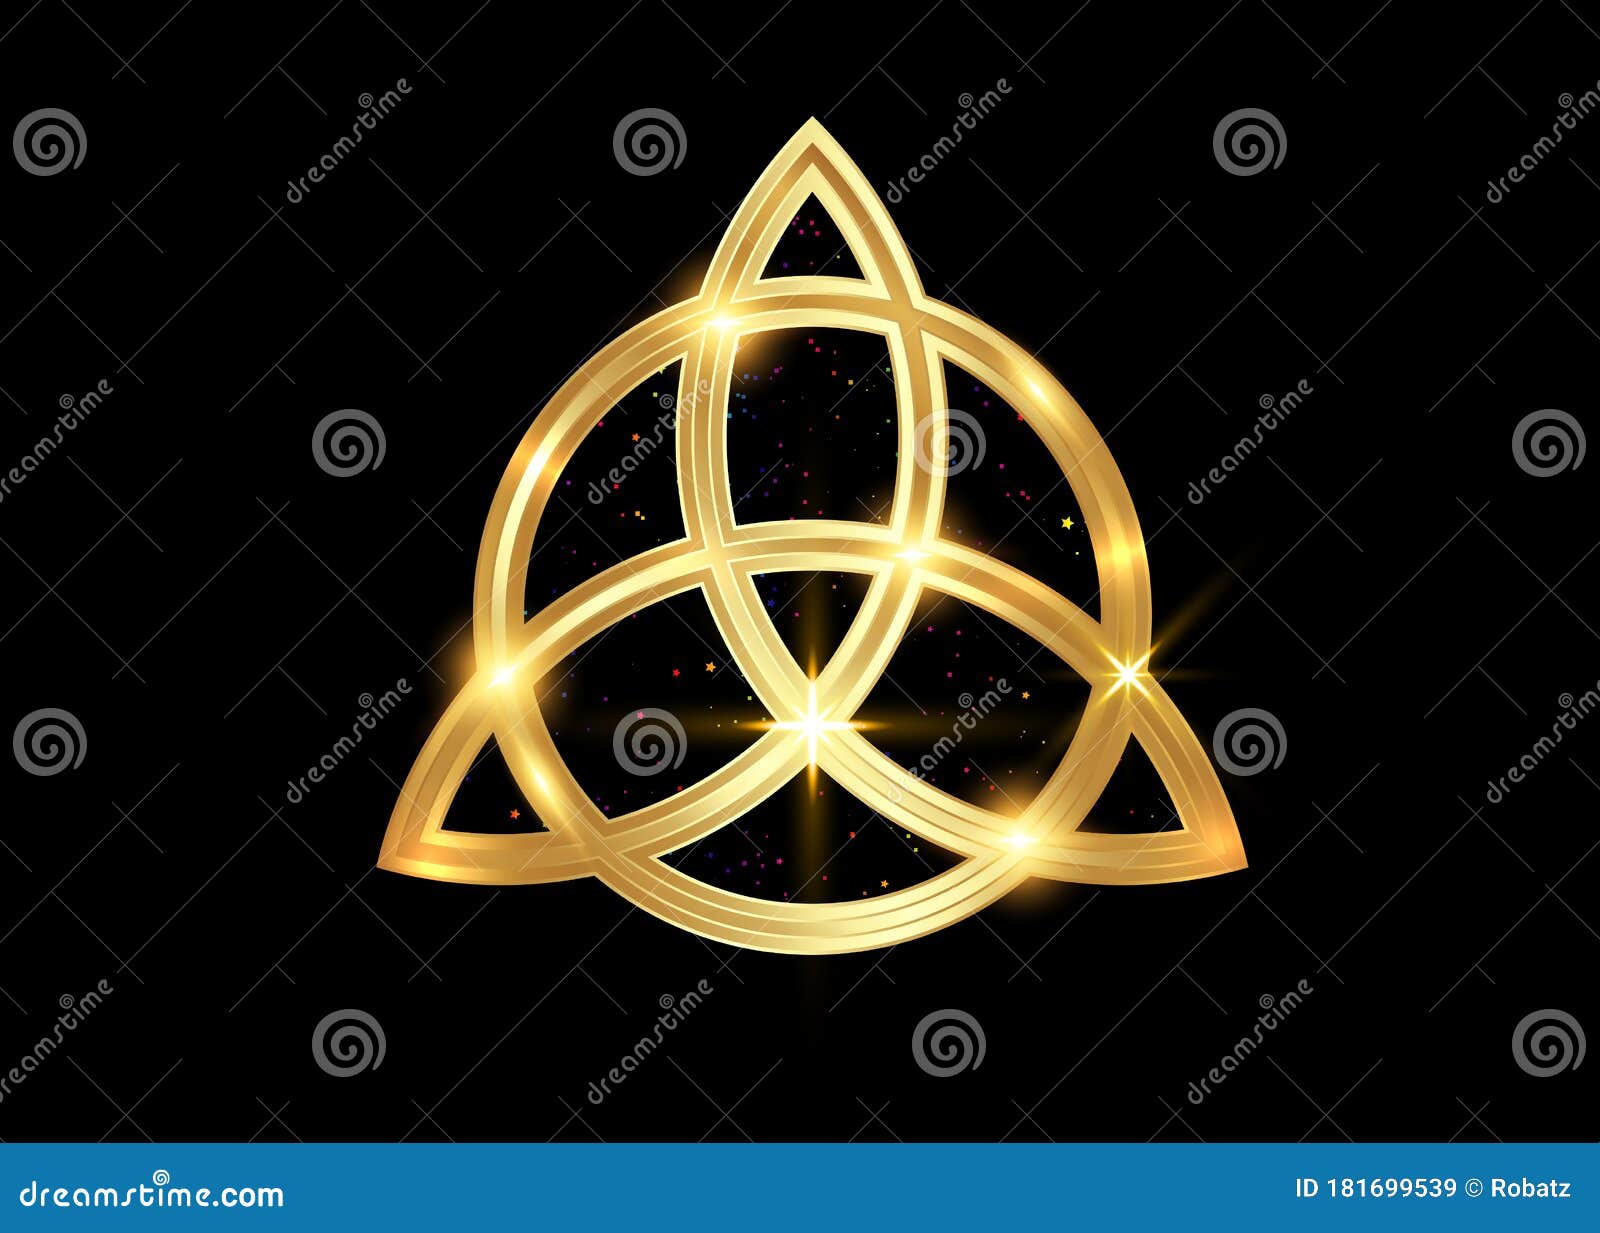 triquetra geometric logo, gold trinity knot, wiccan  for protection.  golden celtic trinity knot set  on black